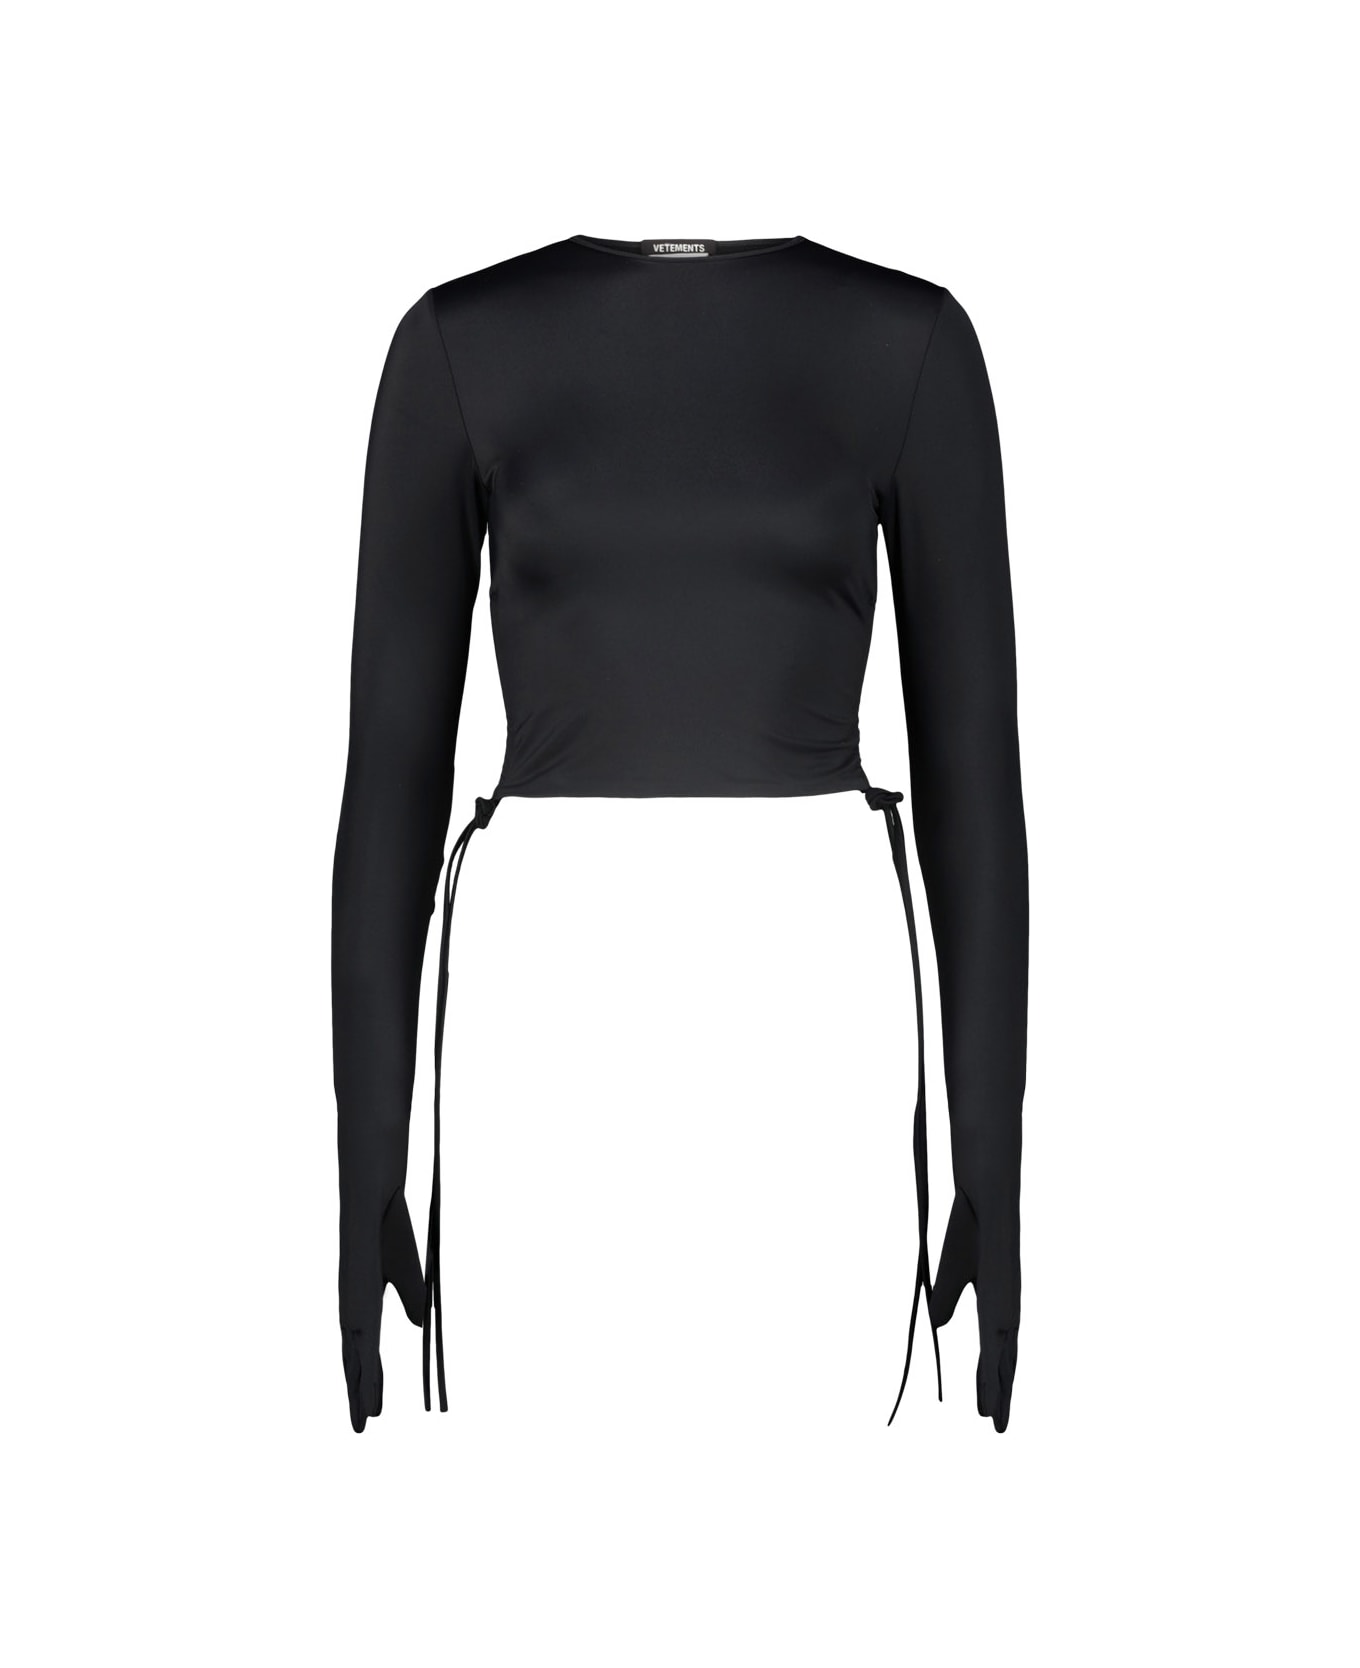 VETEMENTS Cropped Styling Top - Black